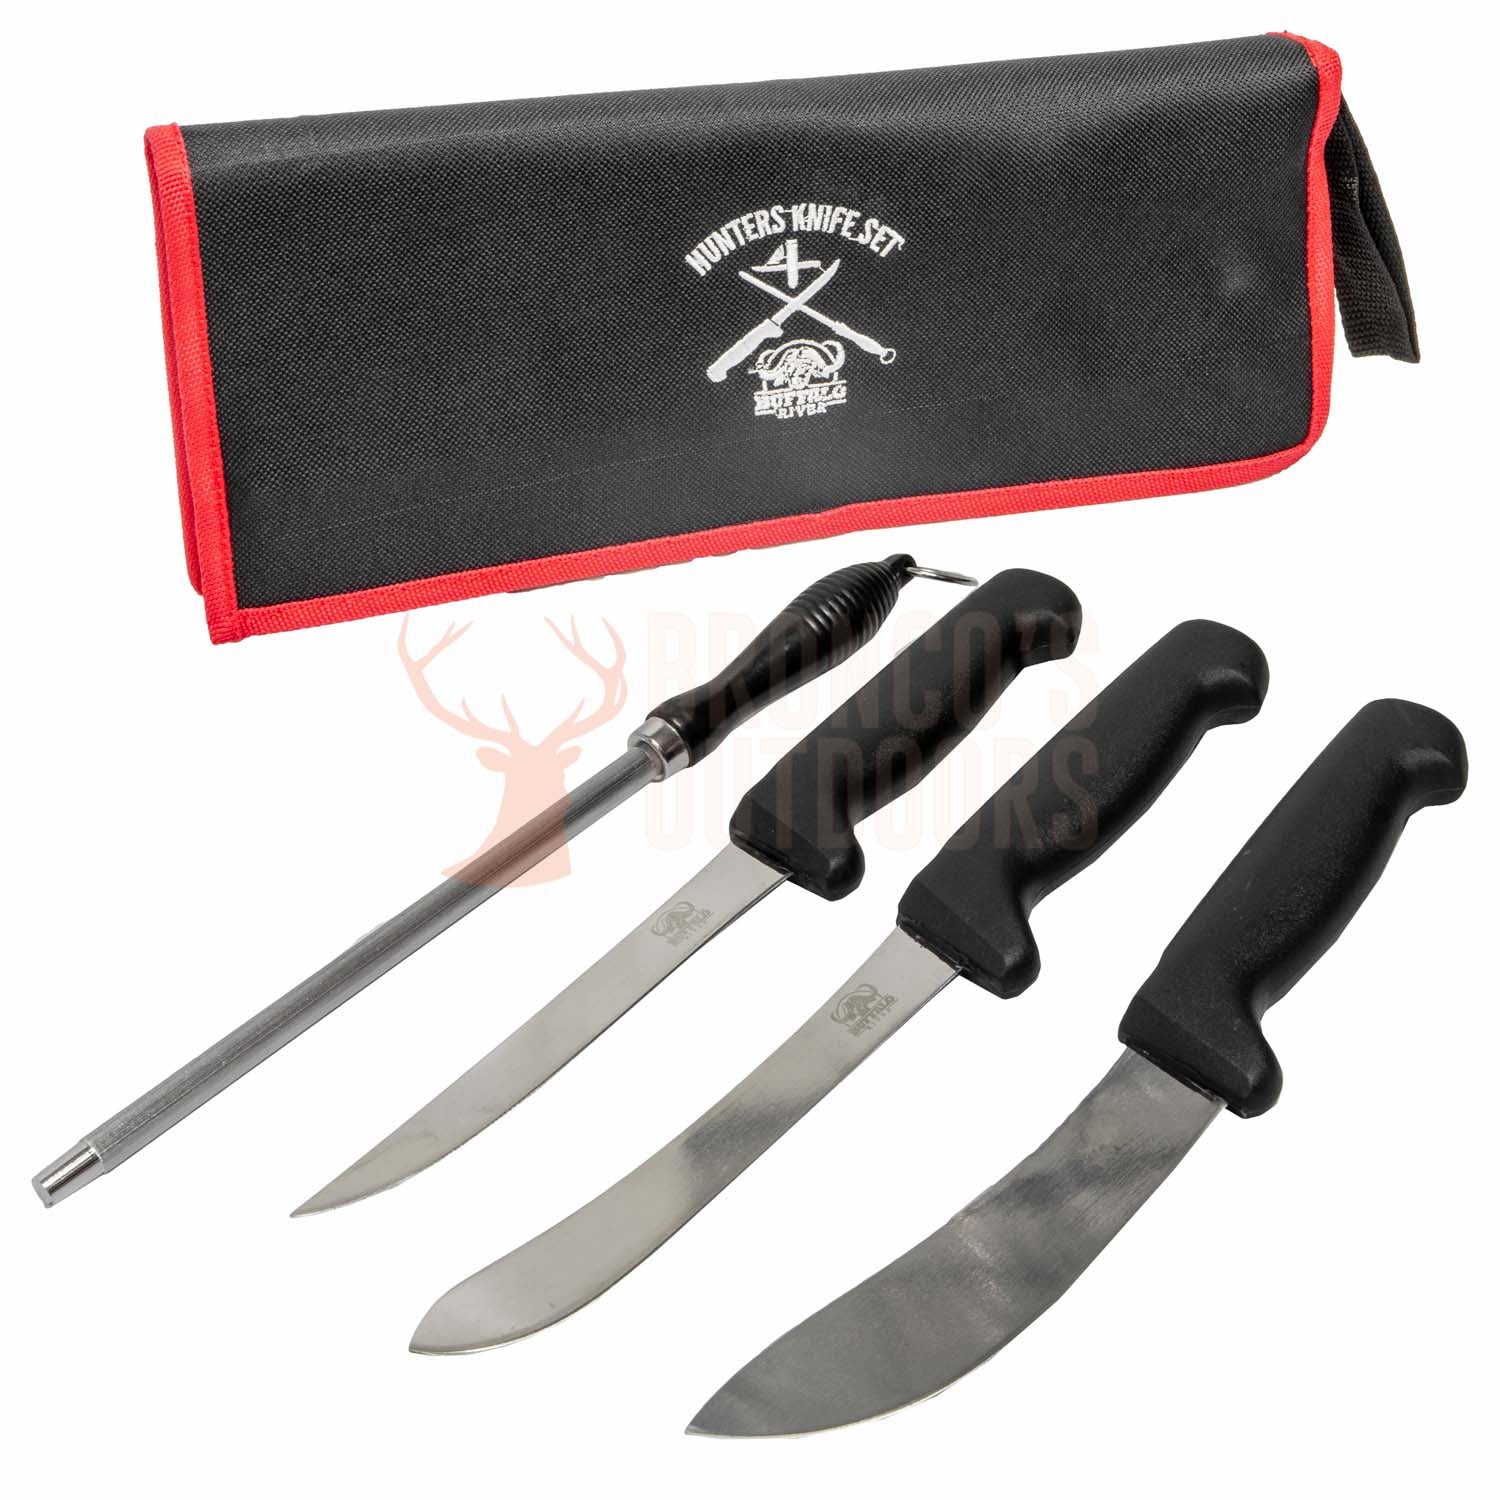 Hunters Knife set with Boning Knife, butchers knife, skinning knife and sharpening steel in knife pouch